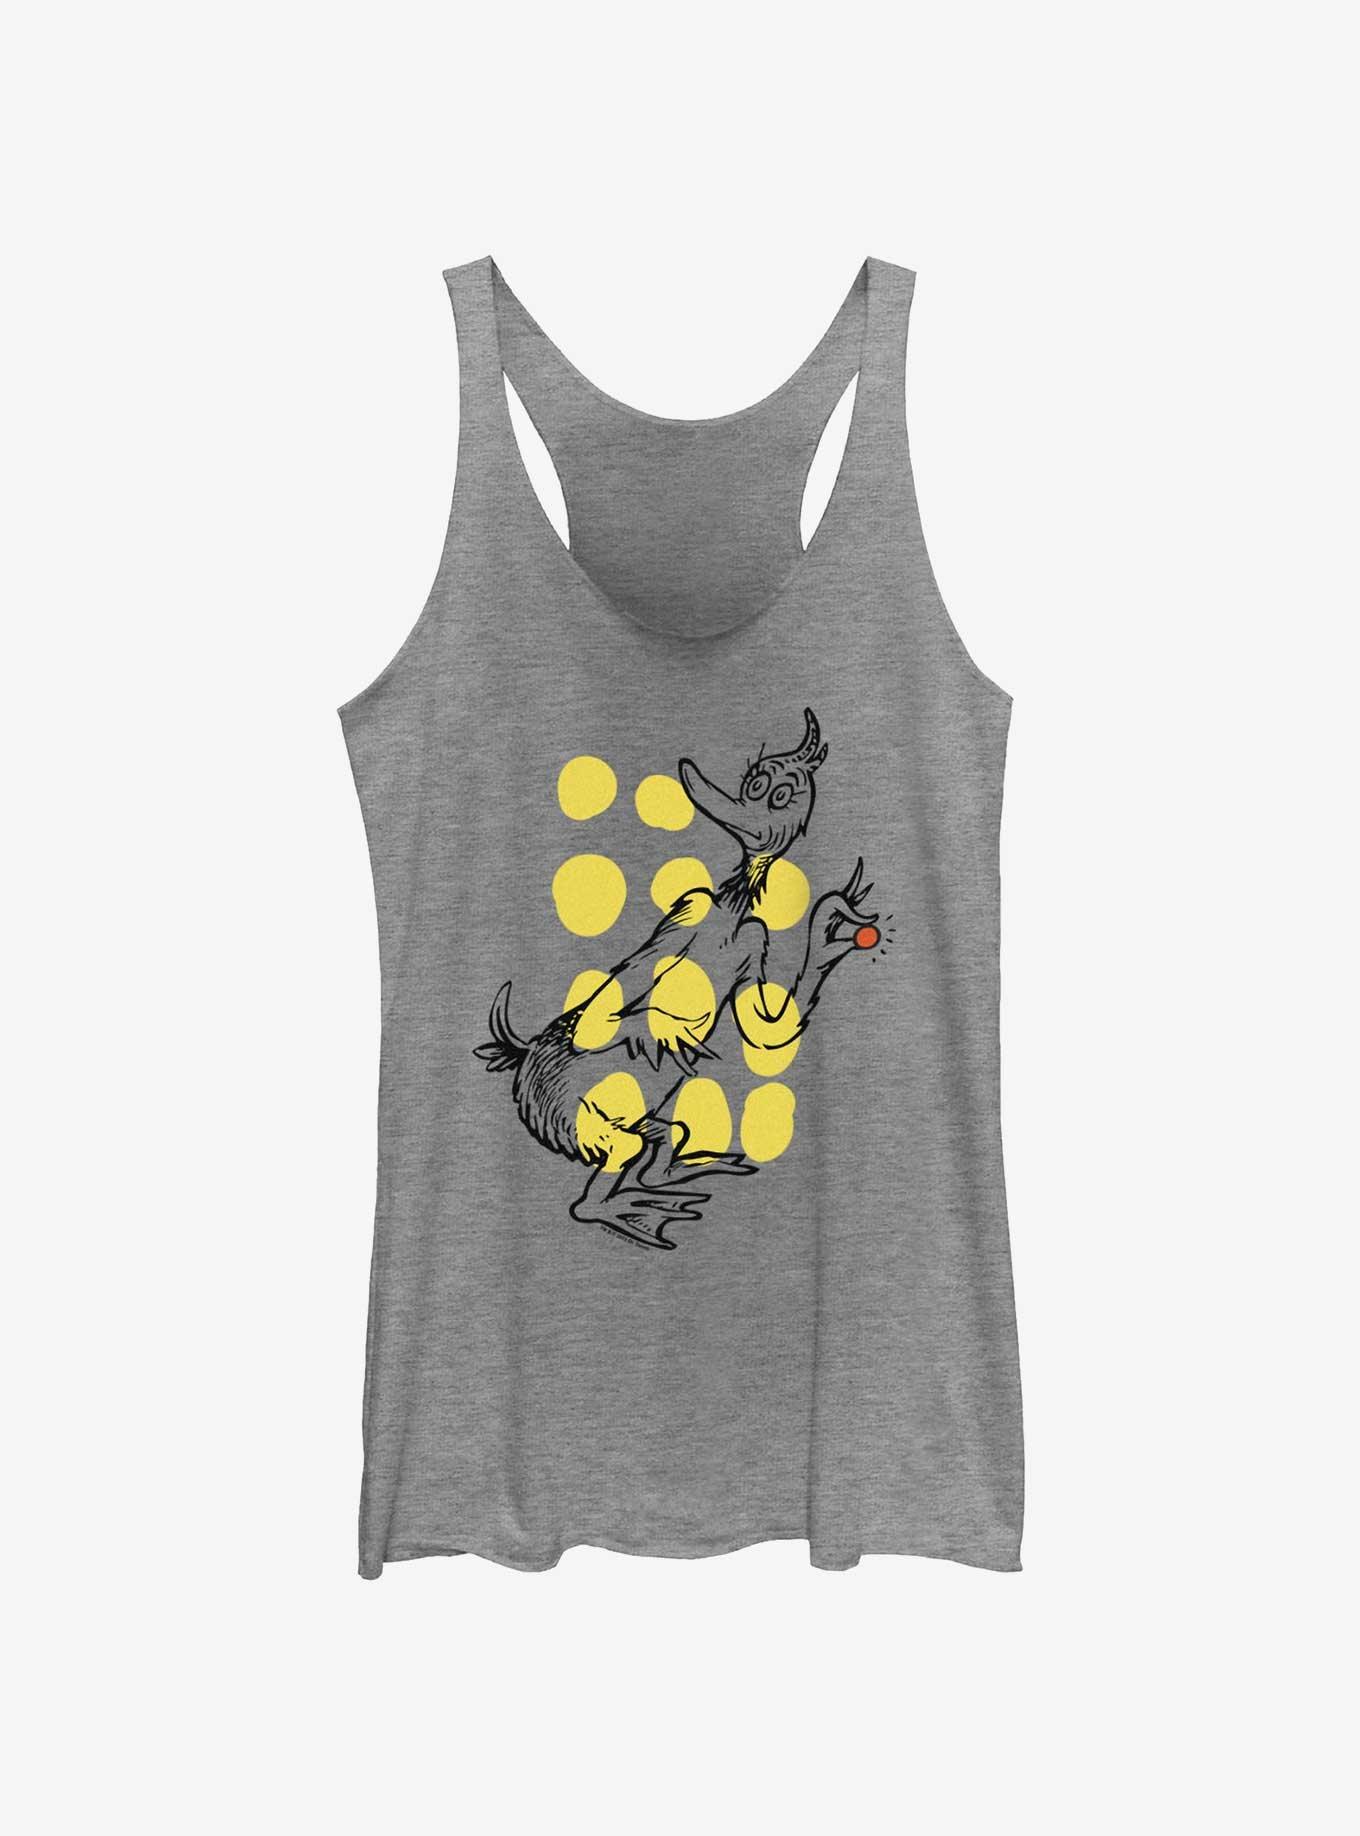 Dr. Seuss Duck And Bippolo Seed Girls Tank, GRAY HTR, hi-res